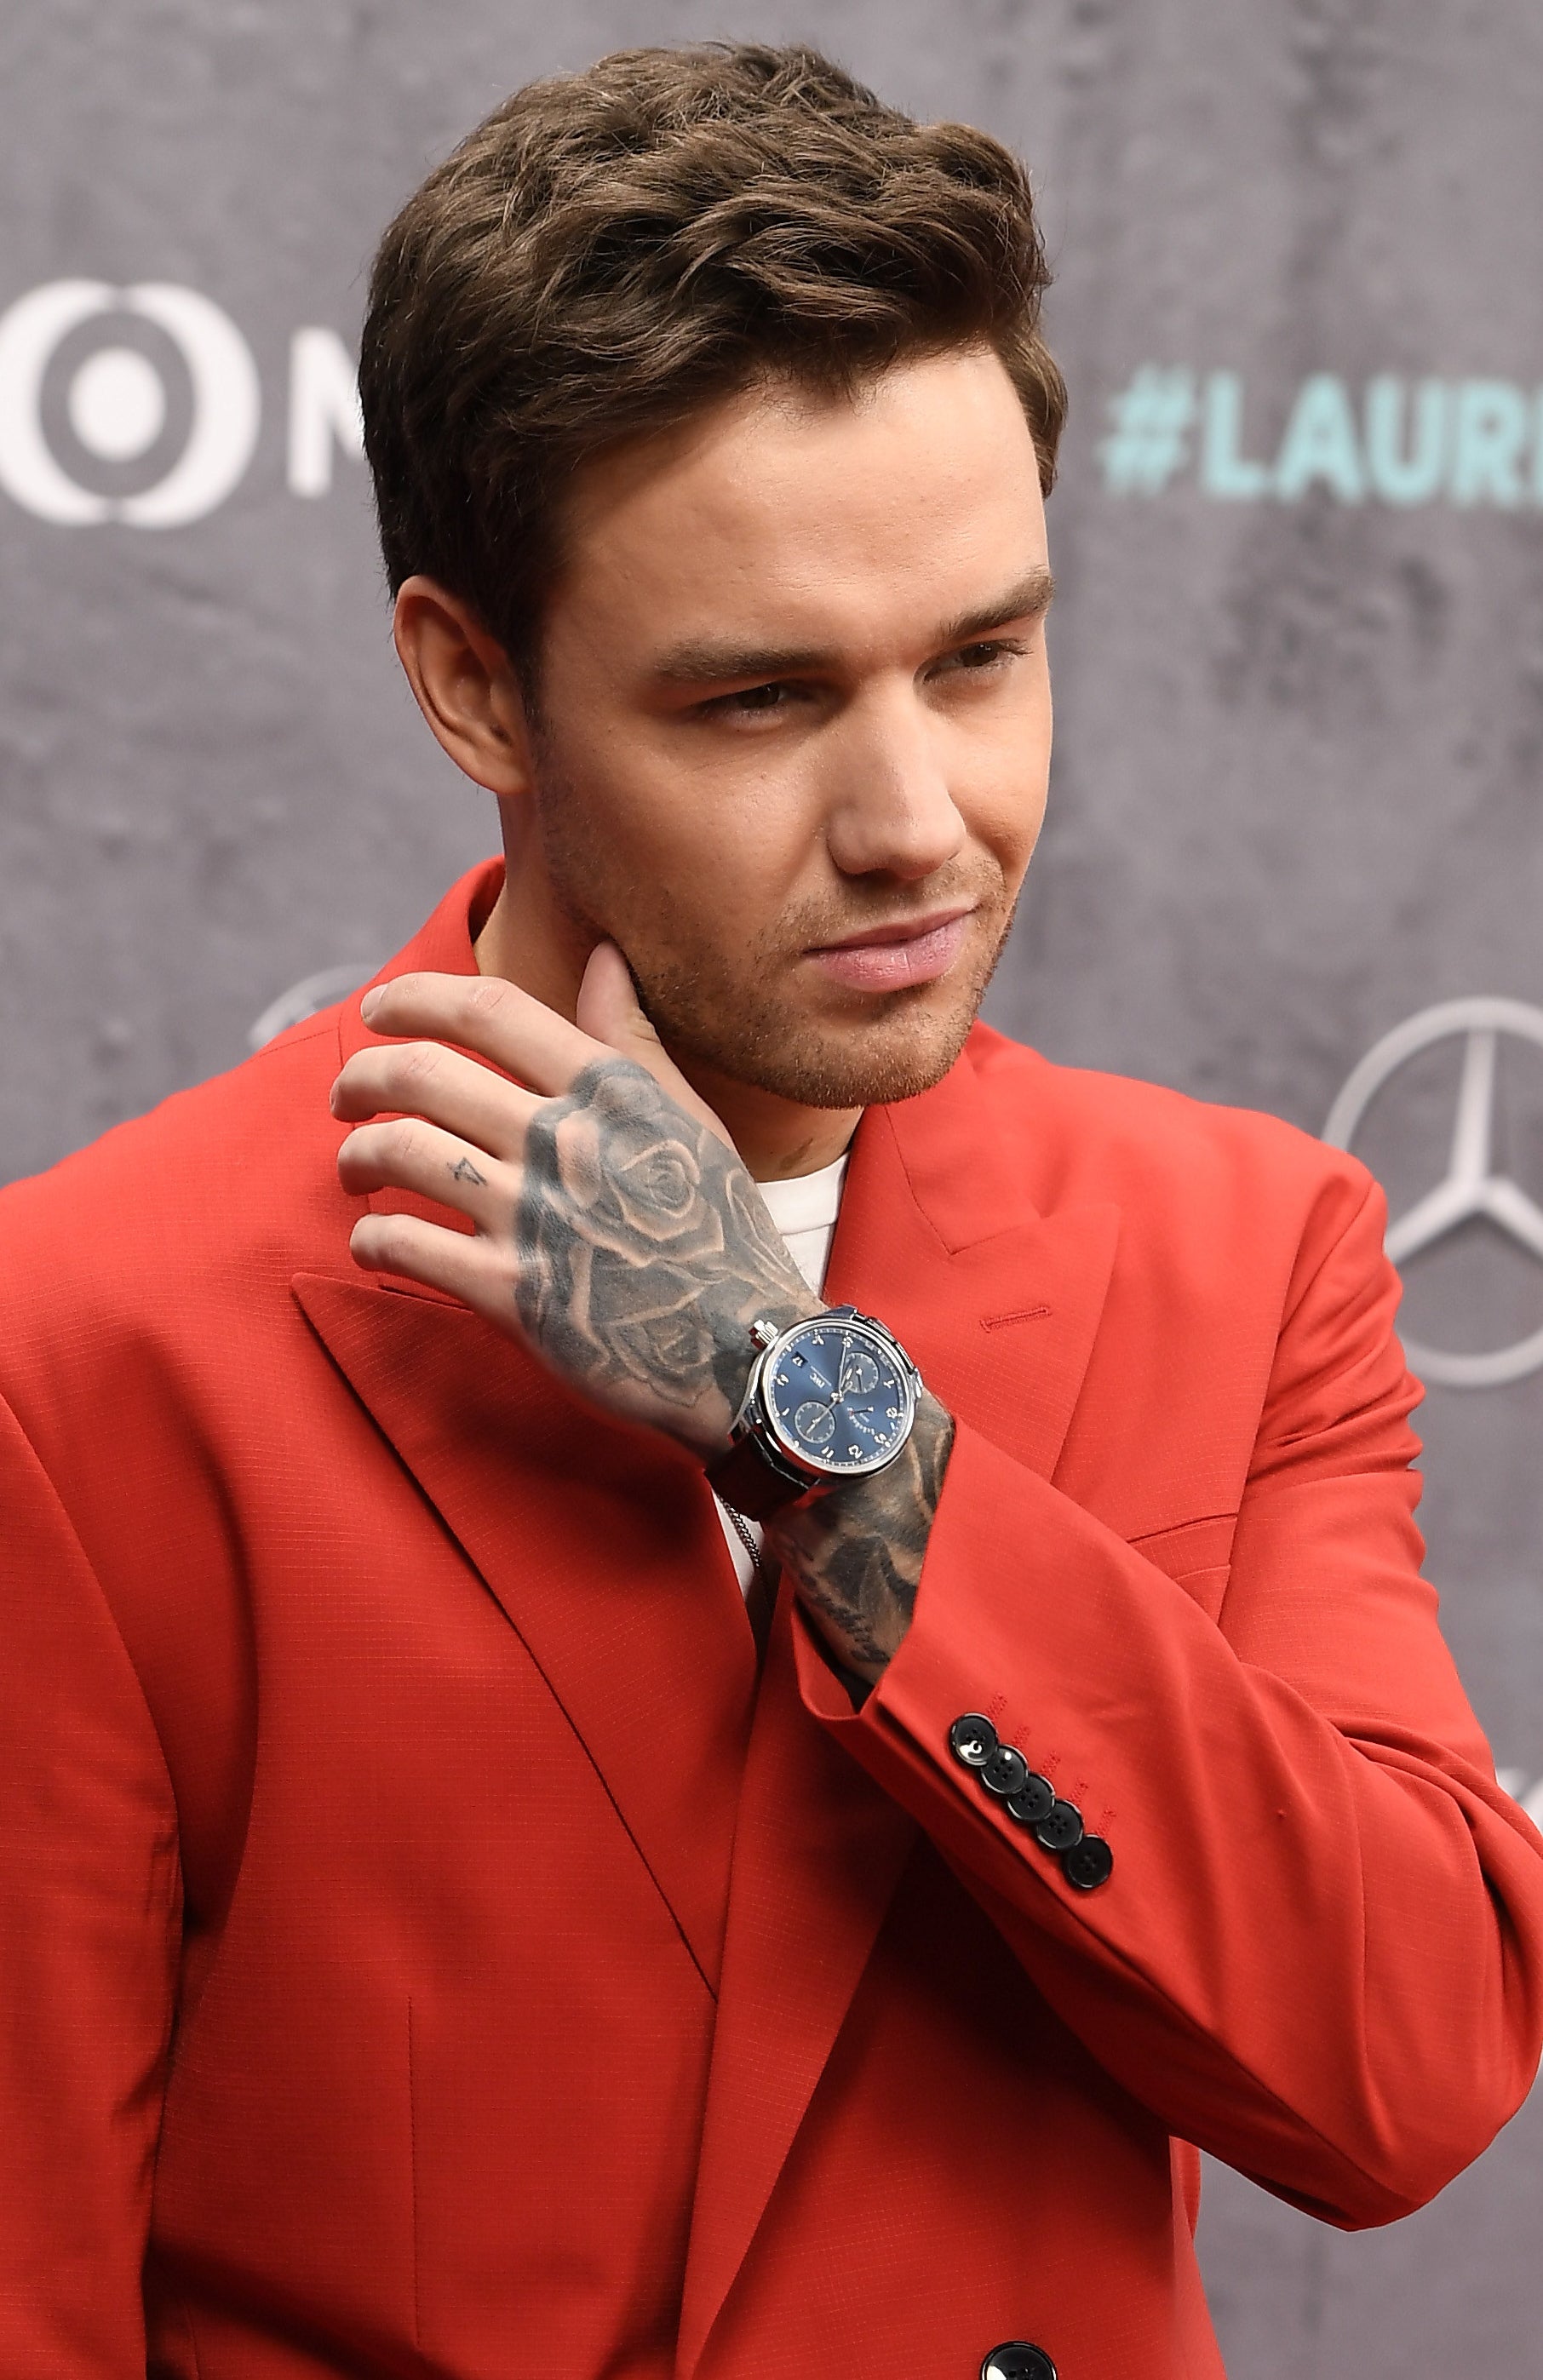 Liam Payne attending the Laureus World Sports Awards in 2020